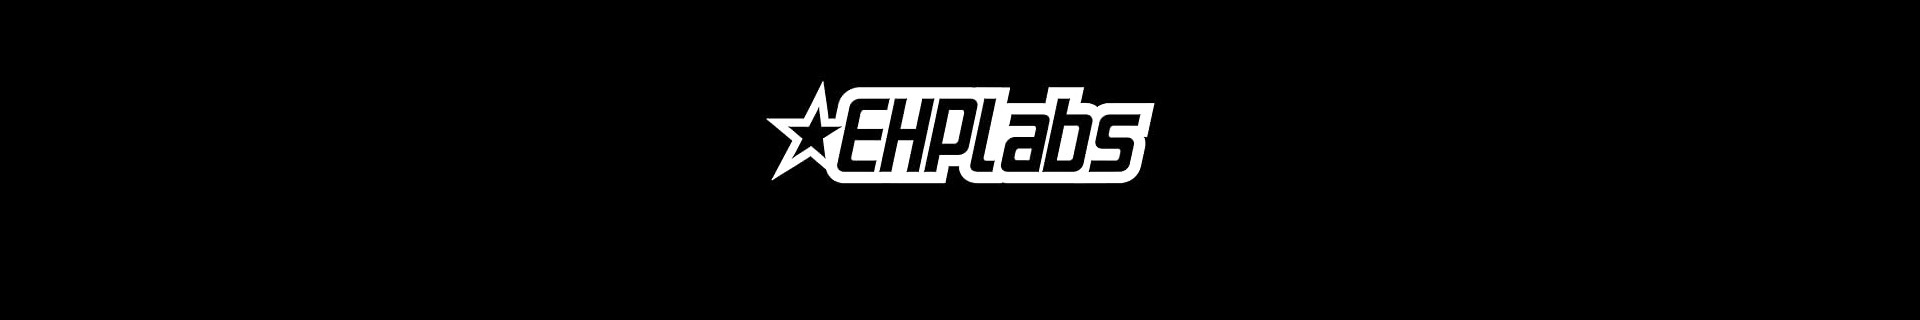 EHPlabs Brand Page